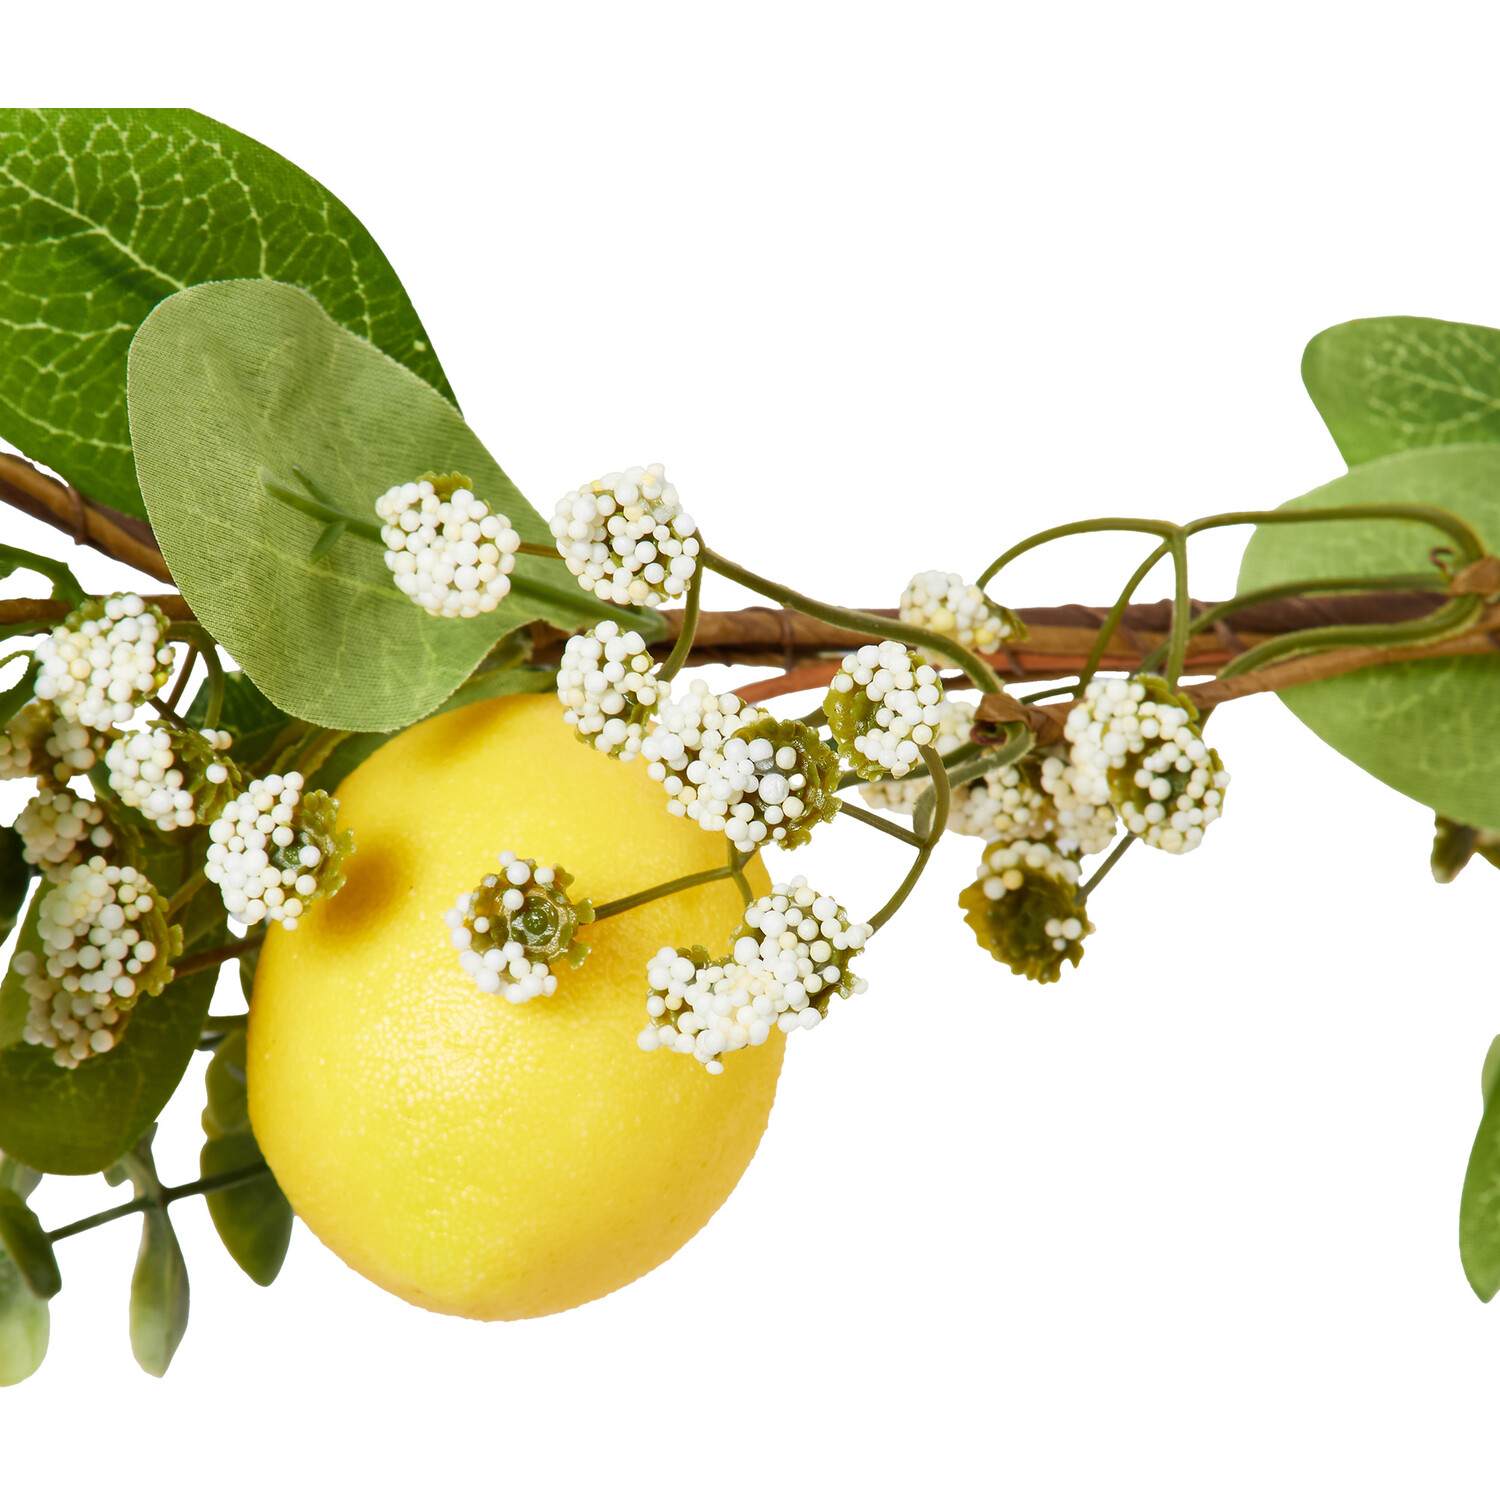 Green Garland with Lemons and Leaves Image 3